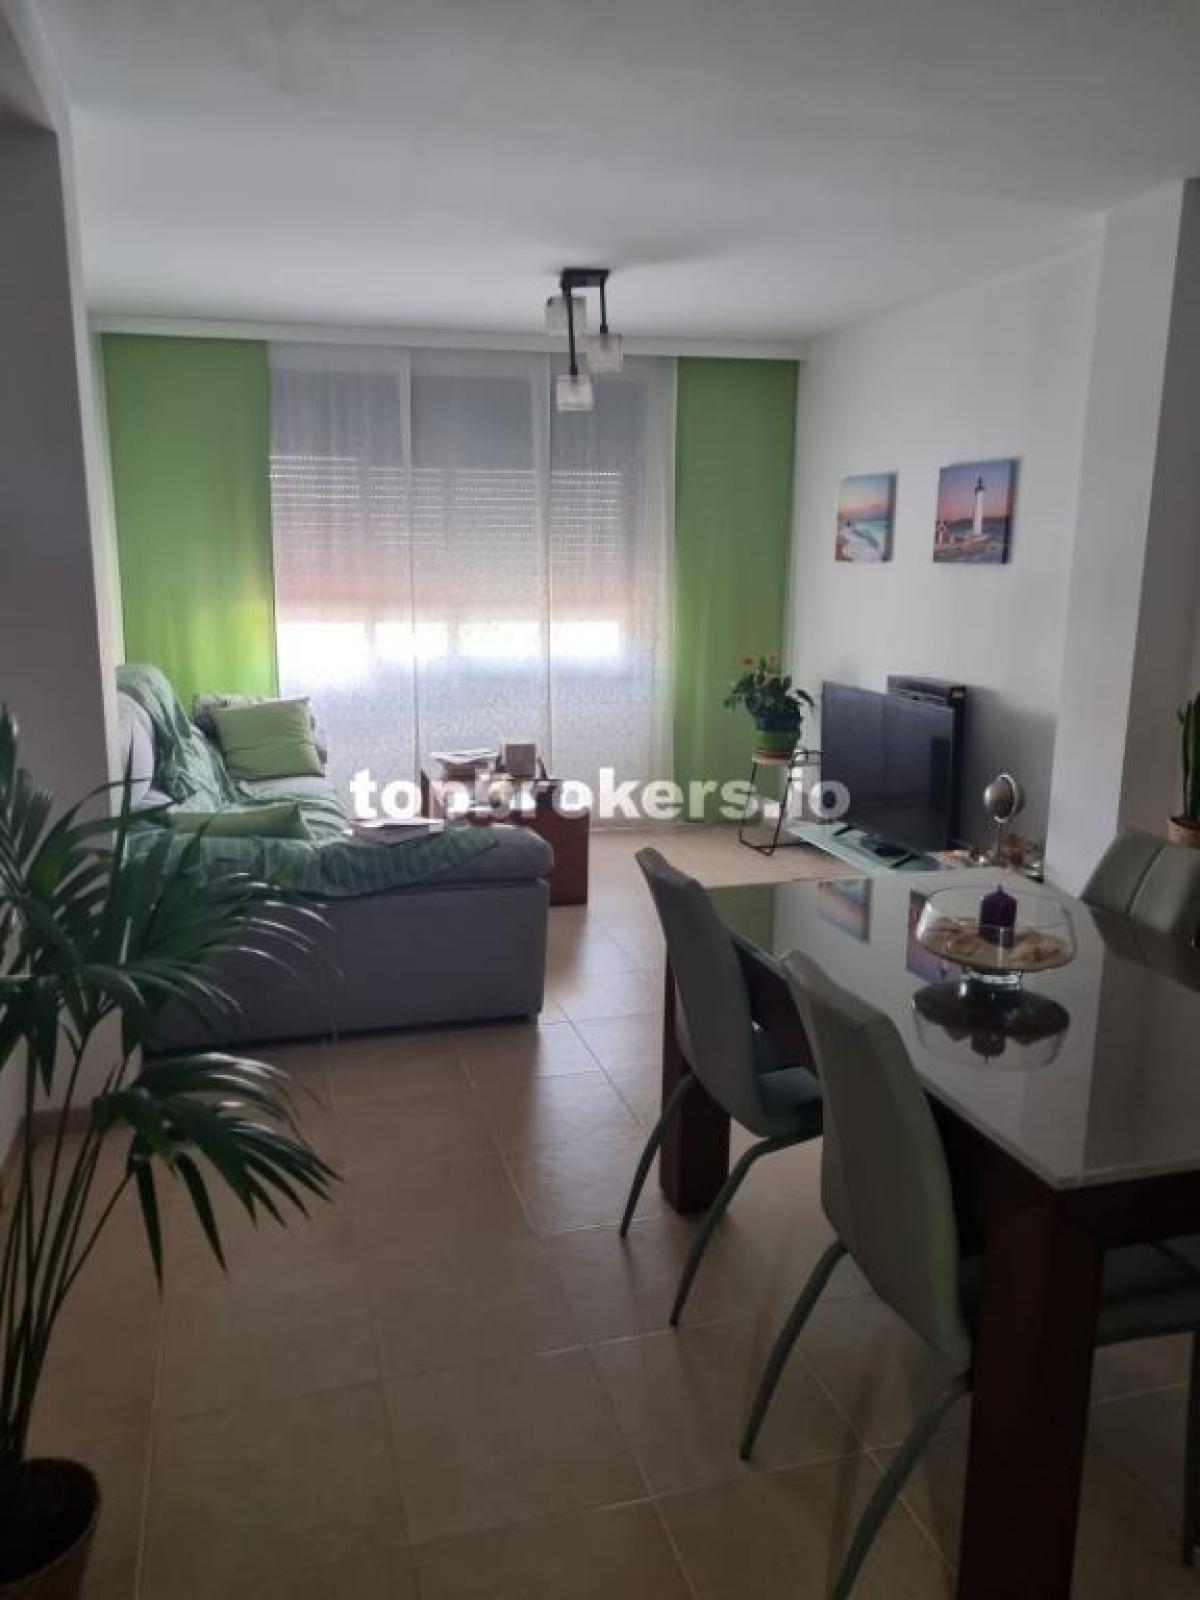 Picture of Apartment For Sale in Tordera, Barcelona, Spain